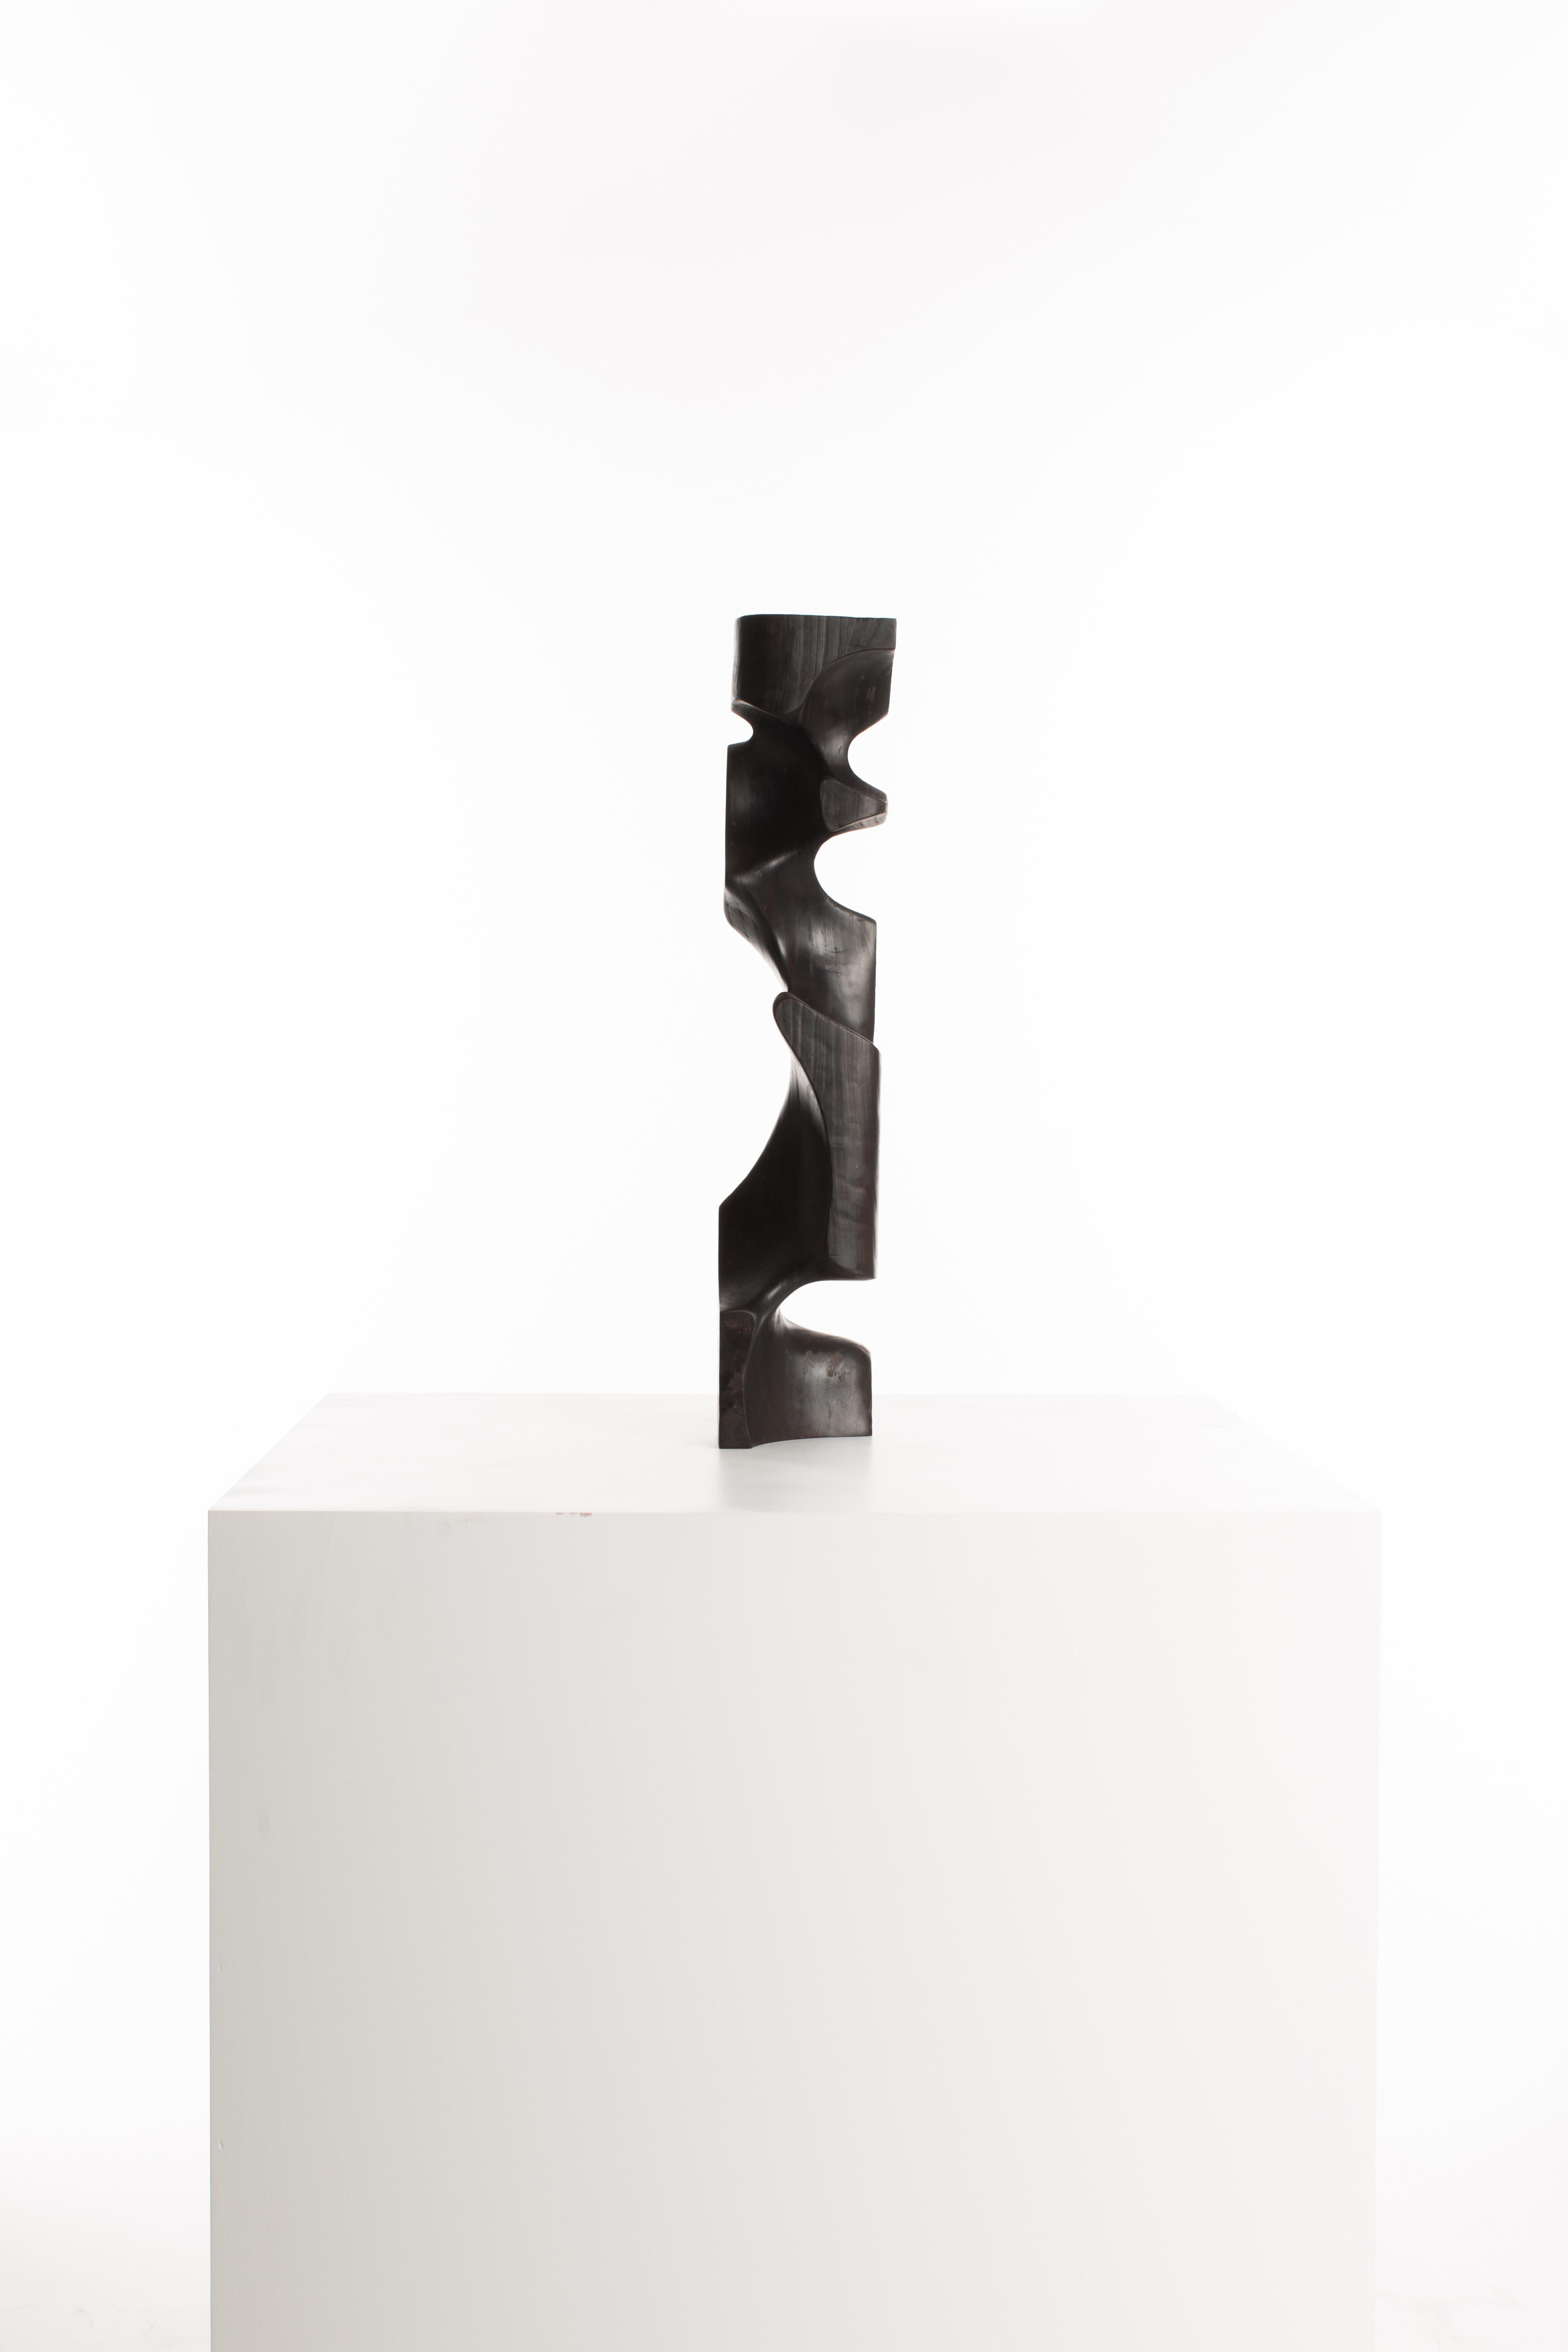 Wooden Cuboid 005 
1/1
Camphor / Burnt 
12cm x 12cm x 61cm 
1.45Kg
2020

Crystalized Sculptures is an abstracted exploration of marks left on the physical mind by experiences of emotion and feelings. In Driaan Claassens' work, where whisps portray